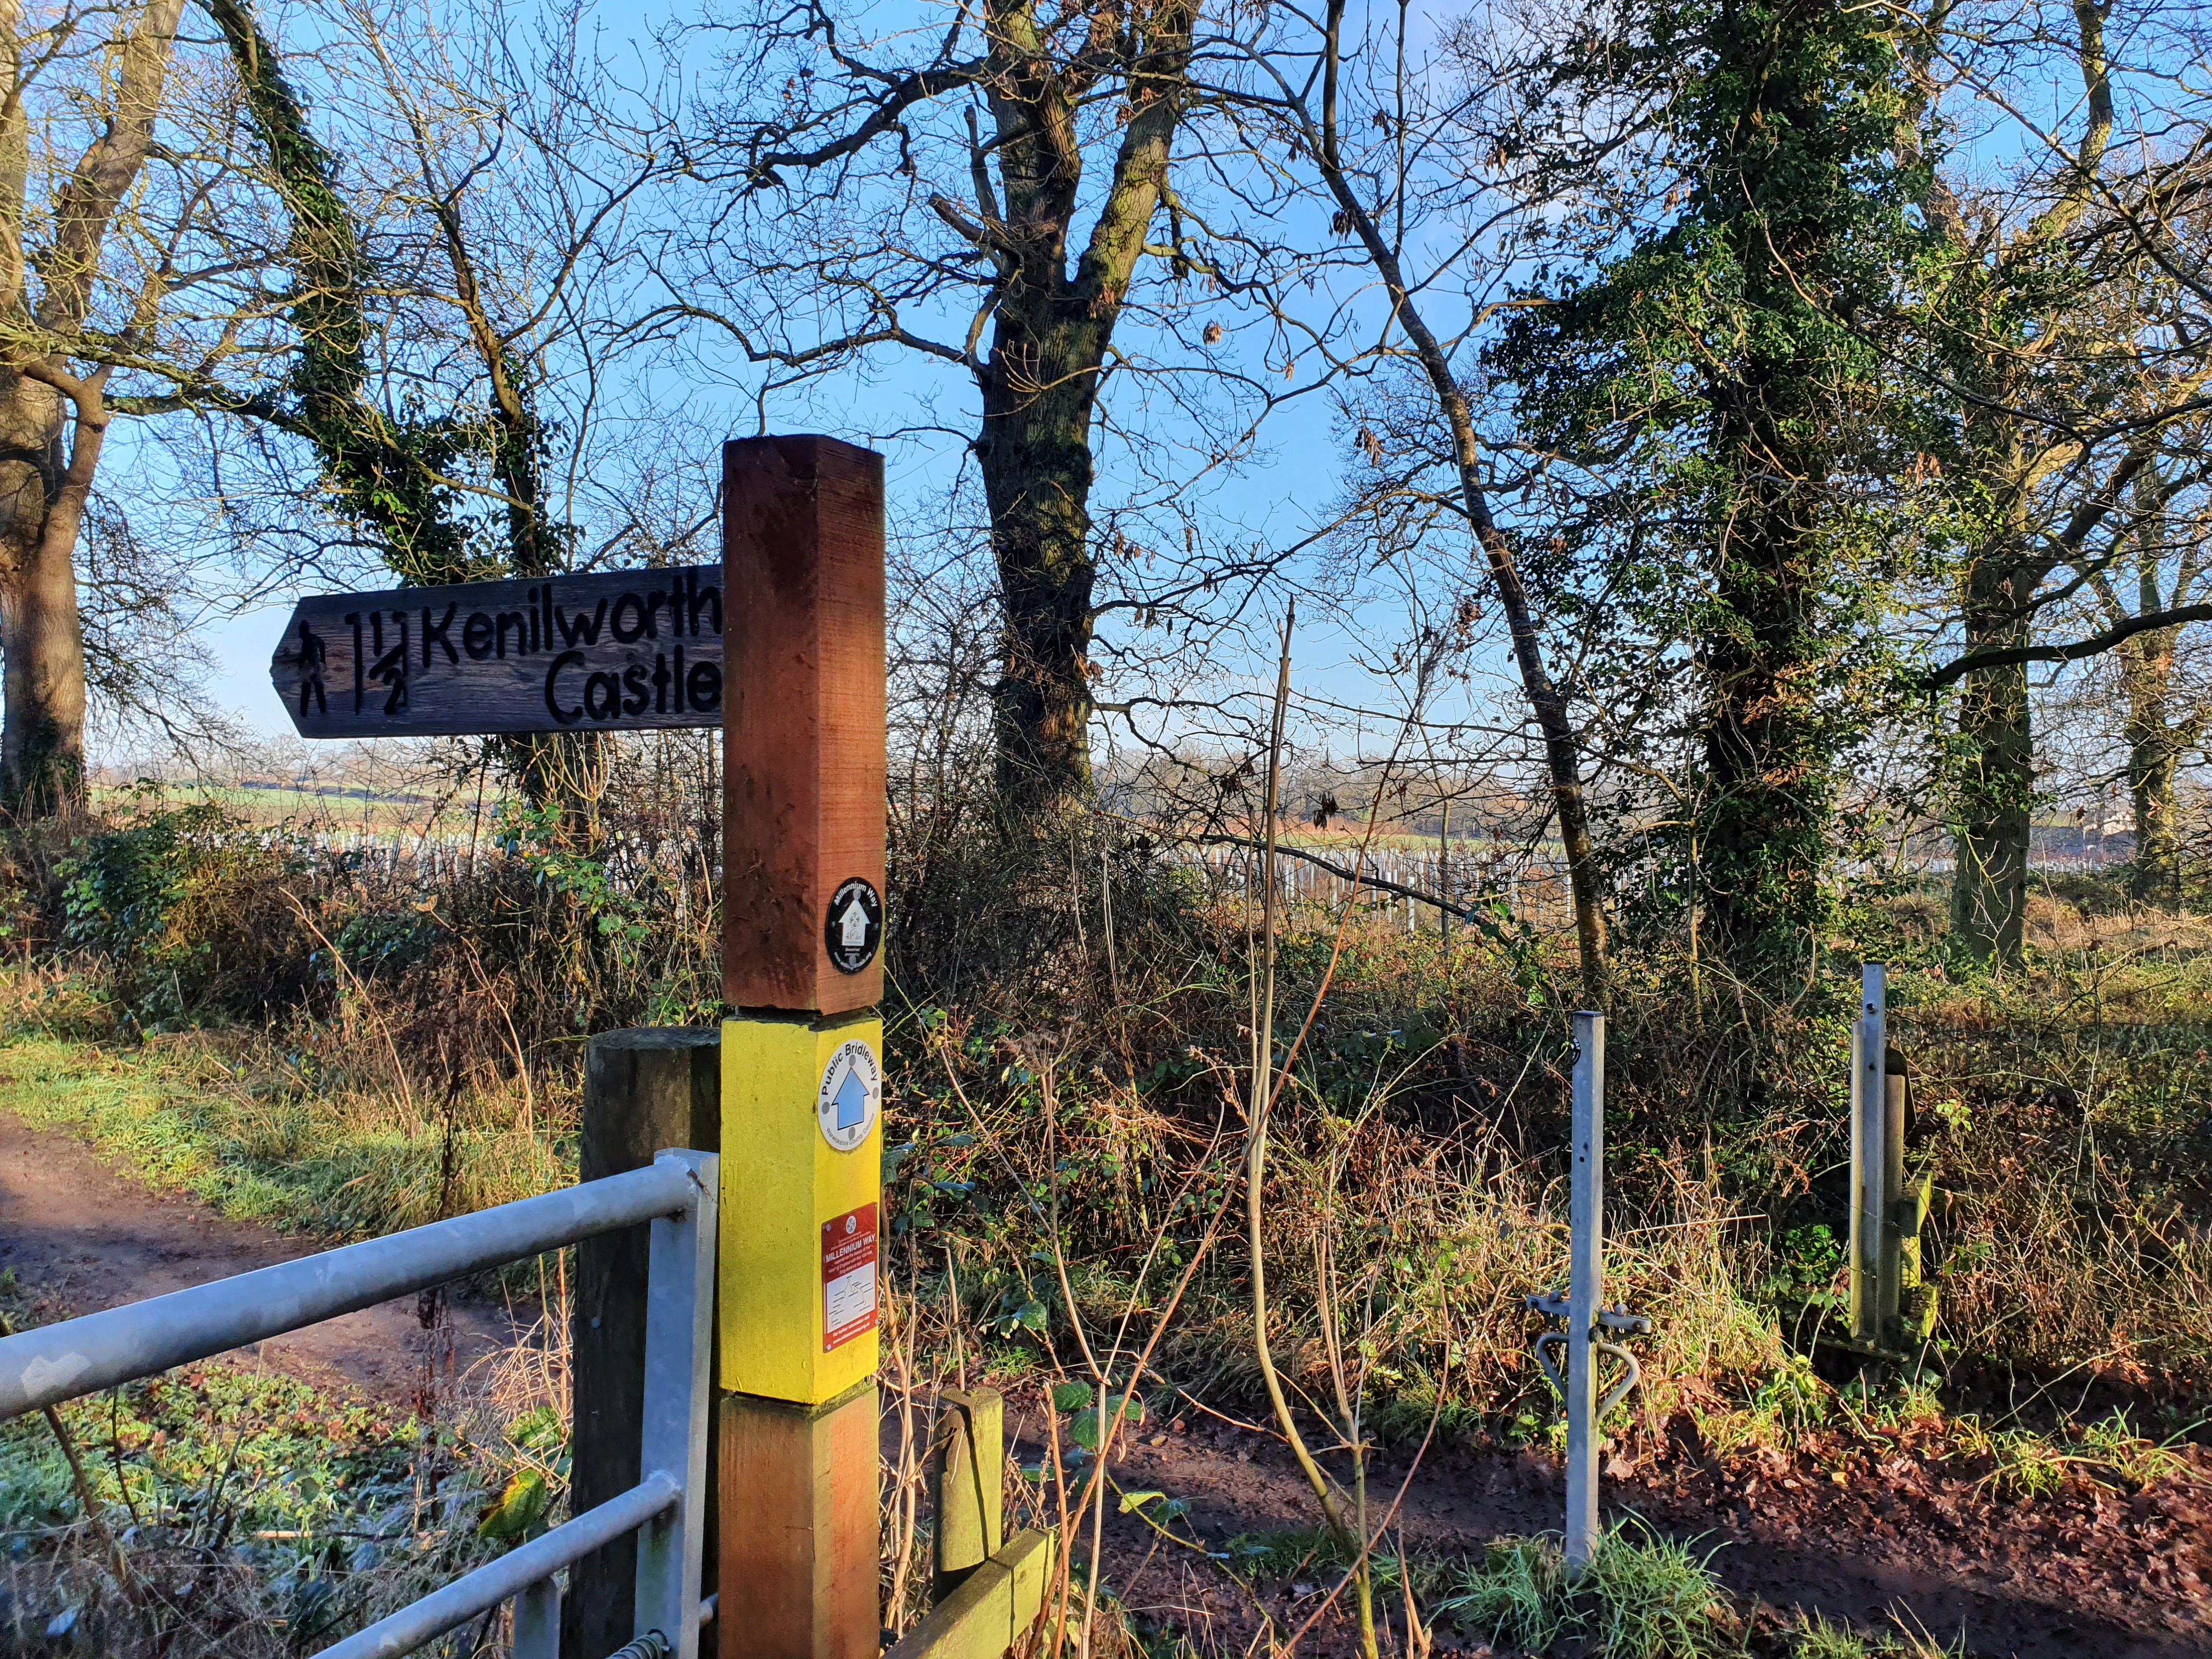 Waymark pointing towards Kenilworth Castle, saying that it is 1.25 miles from that spot